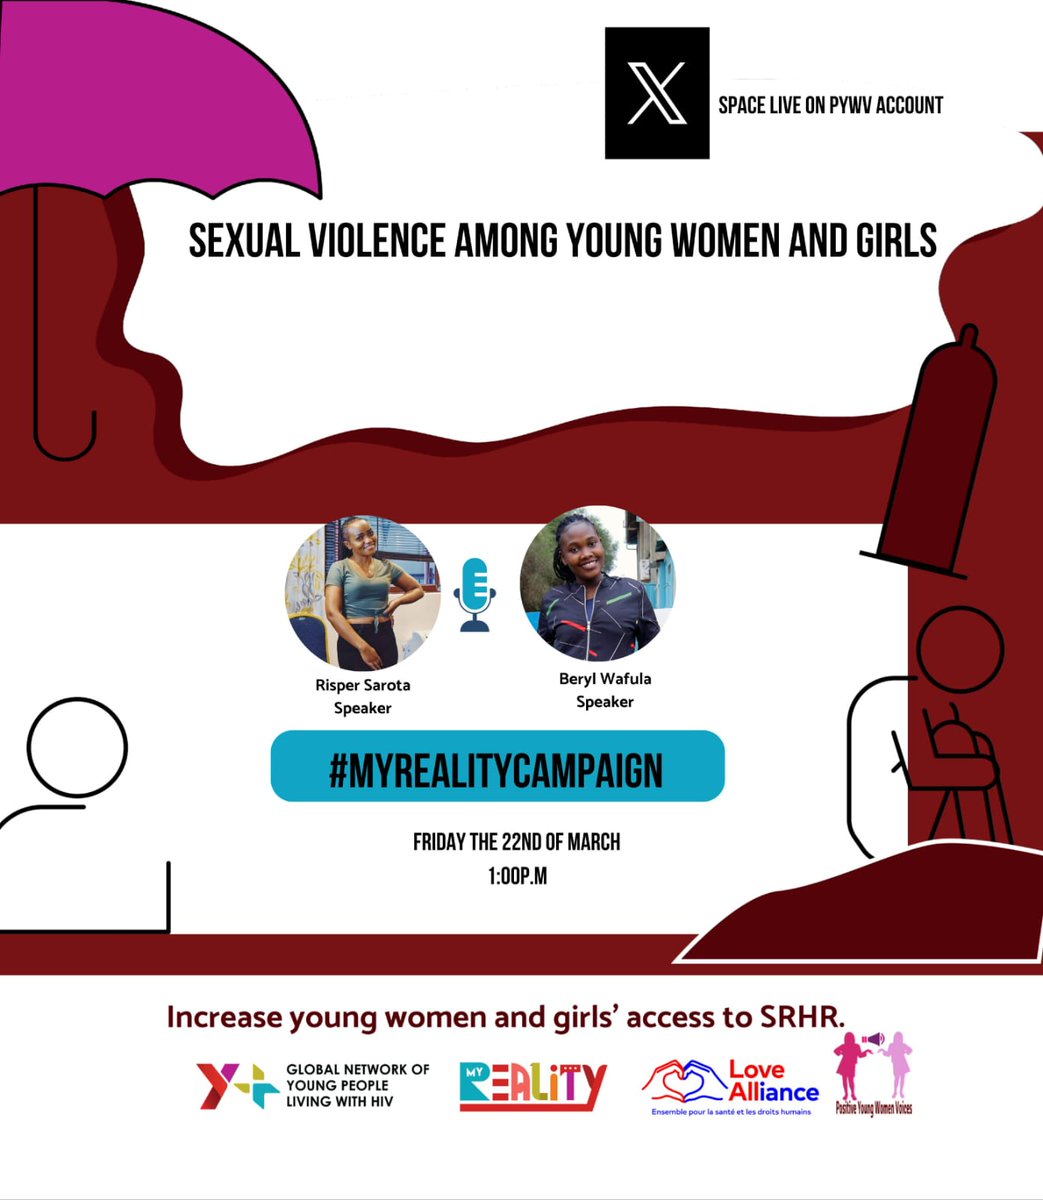 In partnership with @Yplus_Global on #MyRealityCampaign which highlights real life stories @GirlsWomenPower has a space today that focuses on advocacy efforts to end sexual violence among young women and girls in our communities.